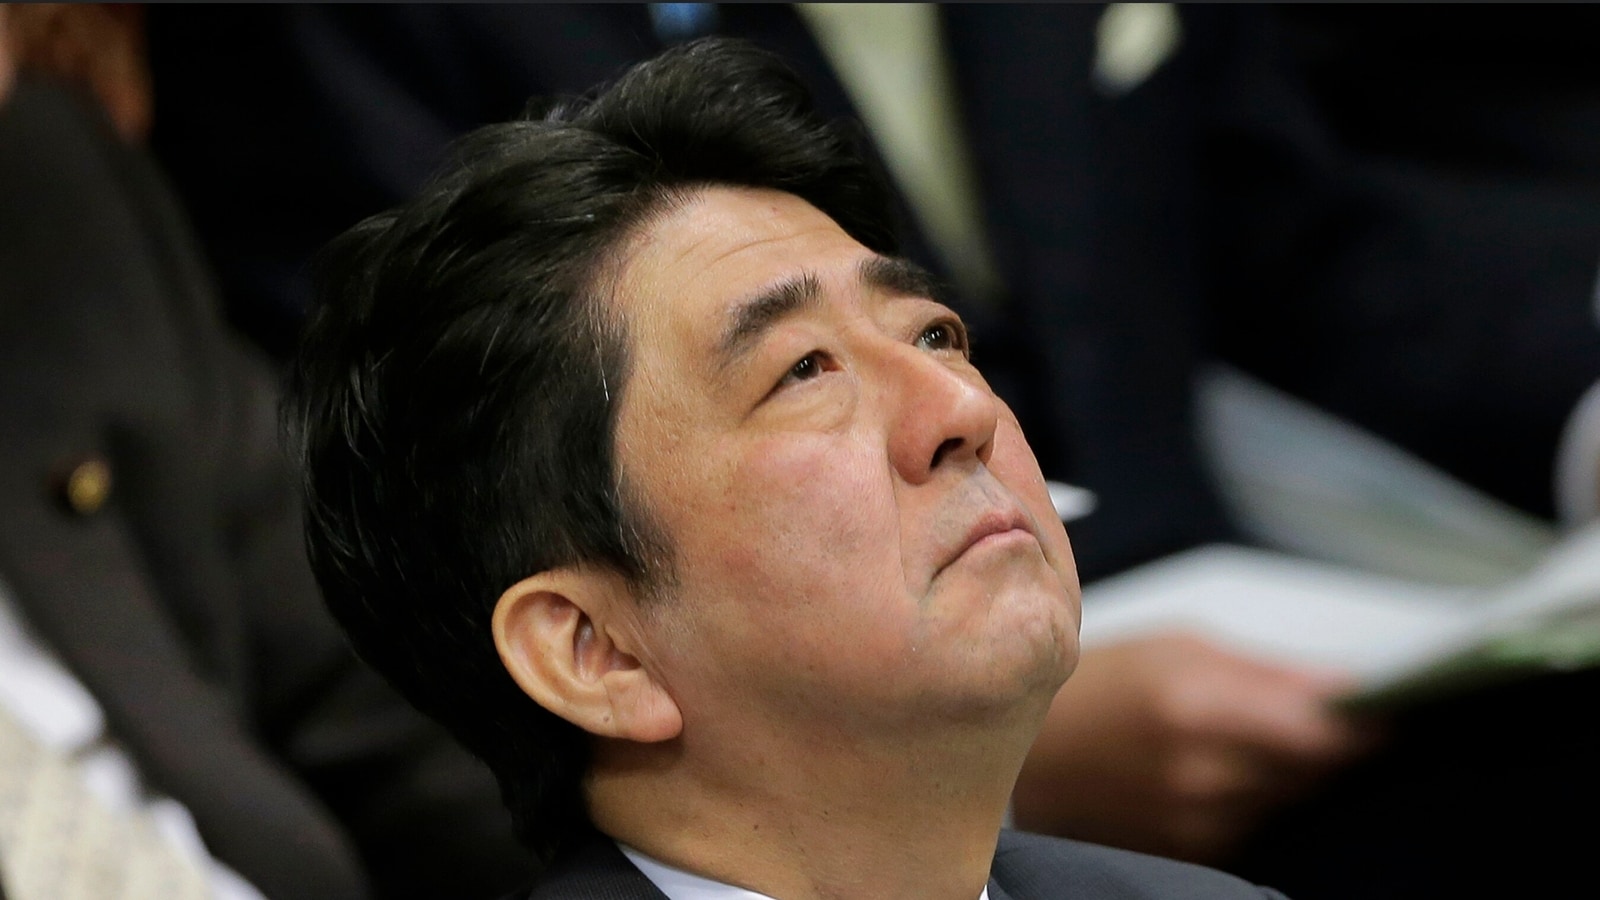 Womenomics' and 'Ganga aarti': 6 things you may not have known about Shinzo Abe